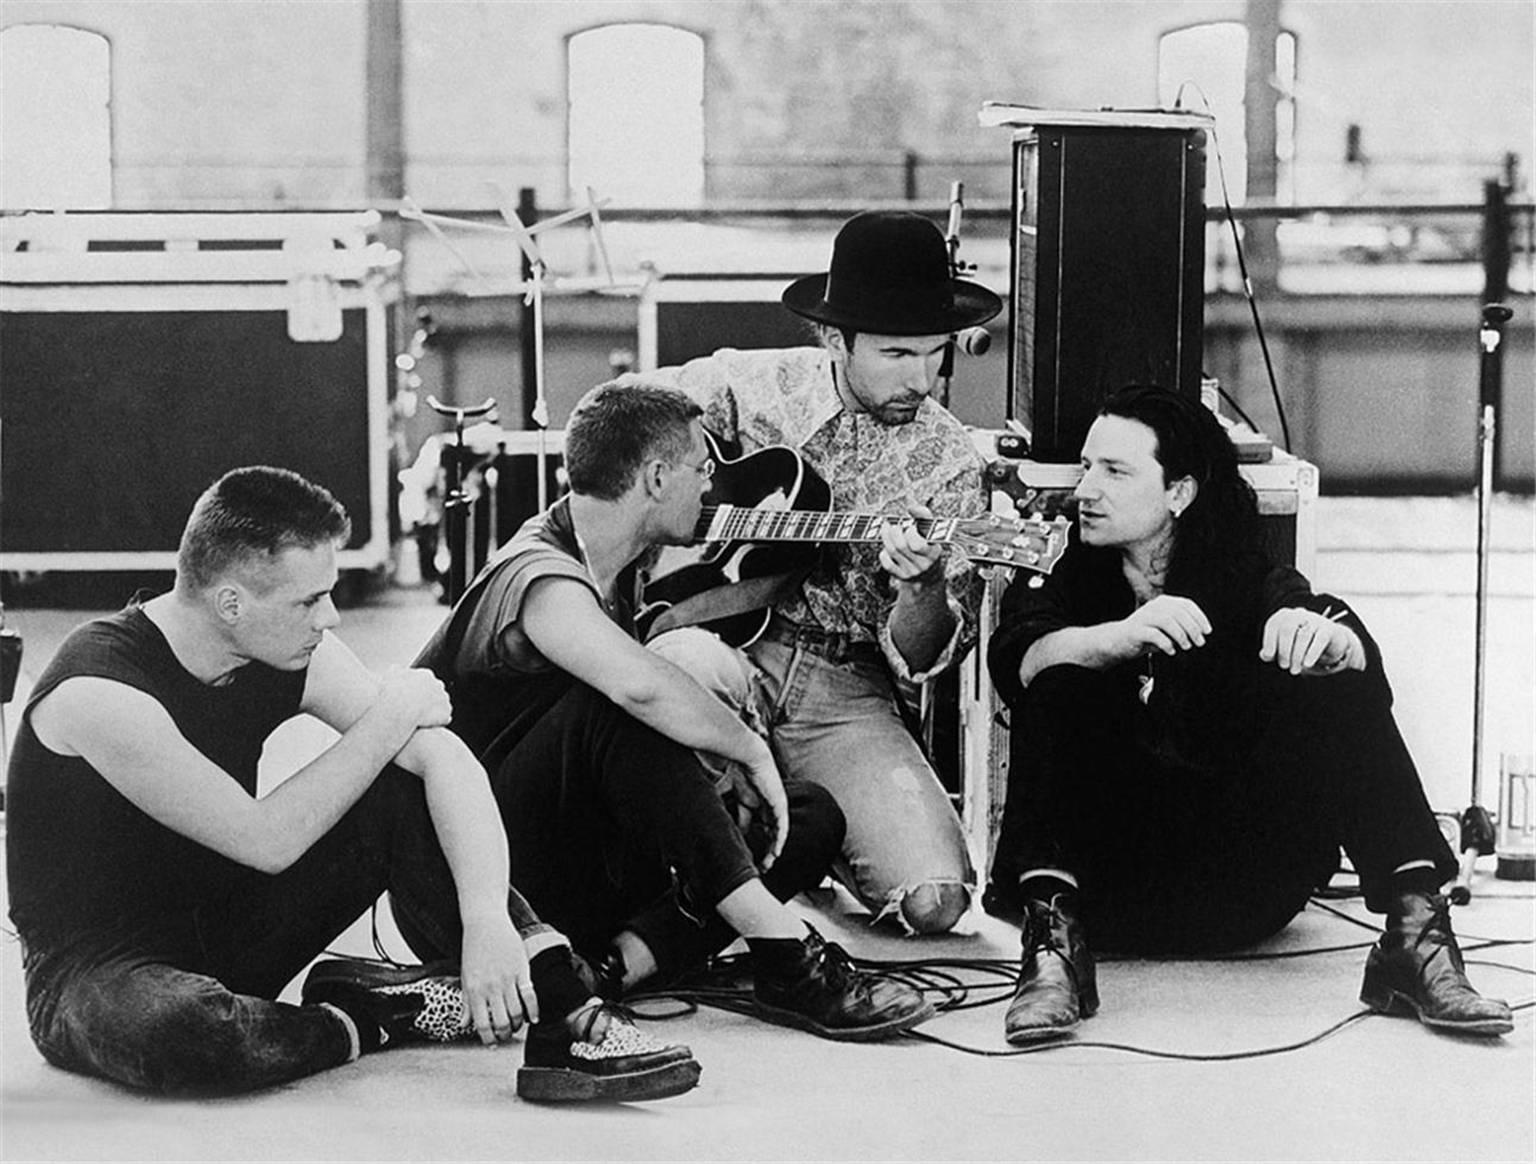 Colm Henry Black and White Photograph – U2 nehmen Rattle and Hum in Dublin auf